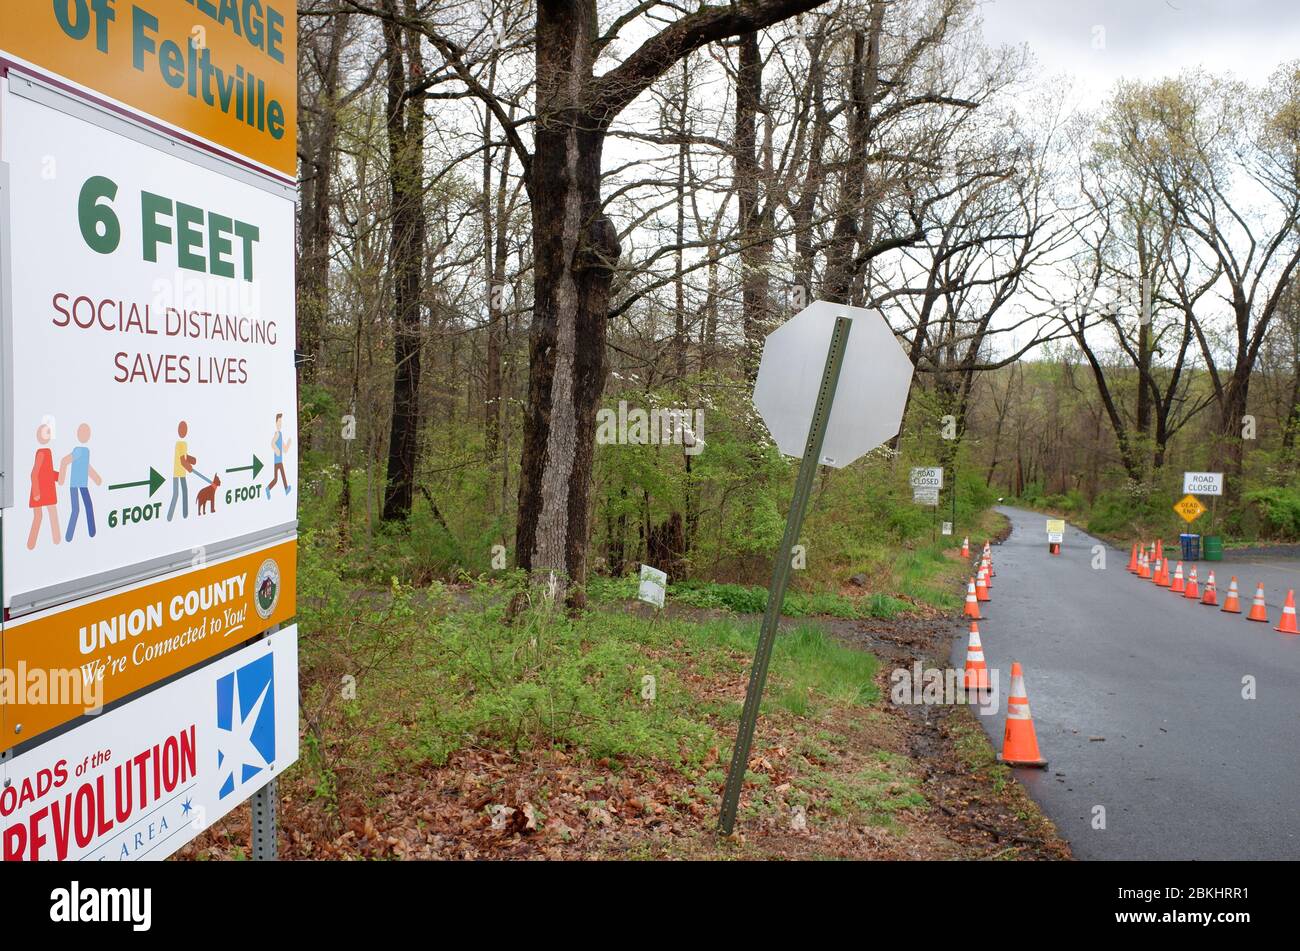 Park closed roadblock with warning sign of social distance by the entrance  of the deserted Village of Feltville during the lockdown of covid-19 coronavirus pandemic outbreak.Watchung Reservation, Berkeley Heights.New Jersey.USA Stock Photo